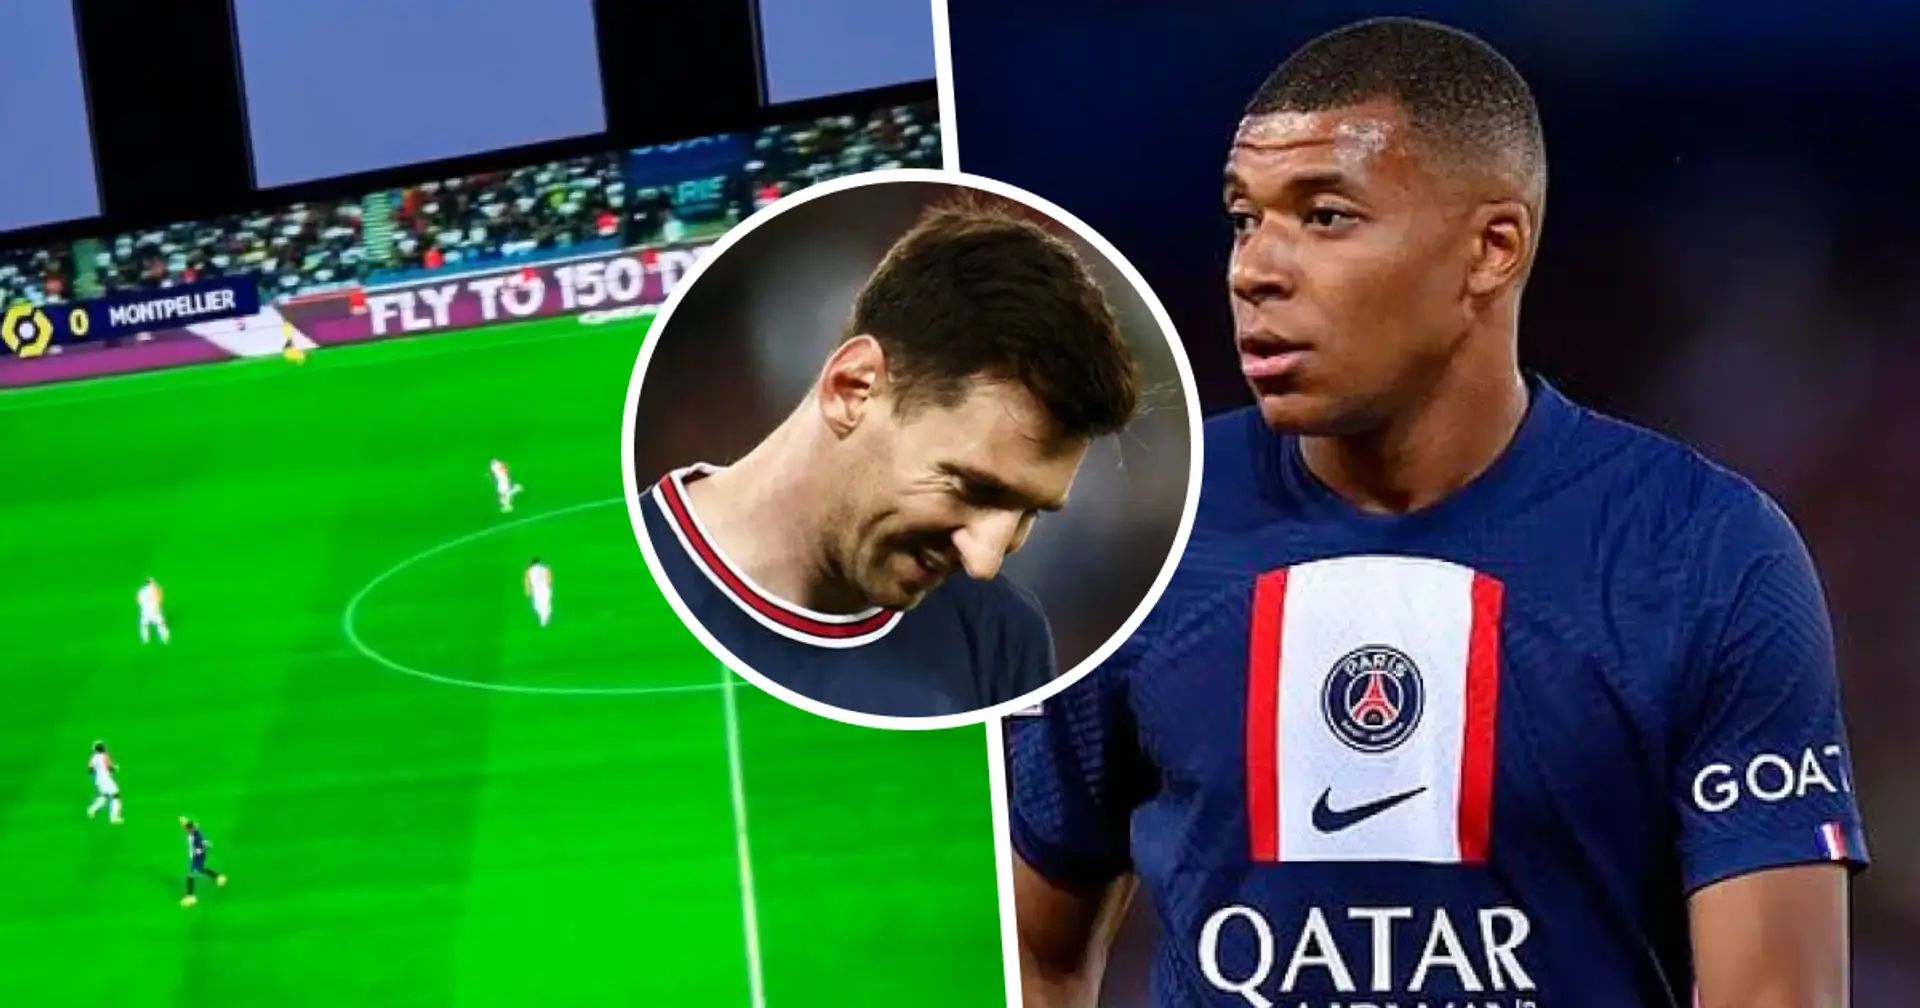 Mbappe can't control emotions as PSG teammate ignores him over Messi in latest match